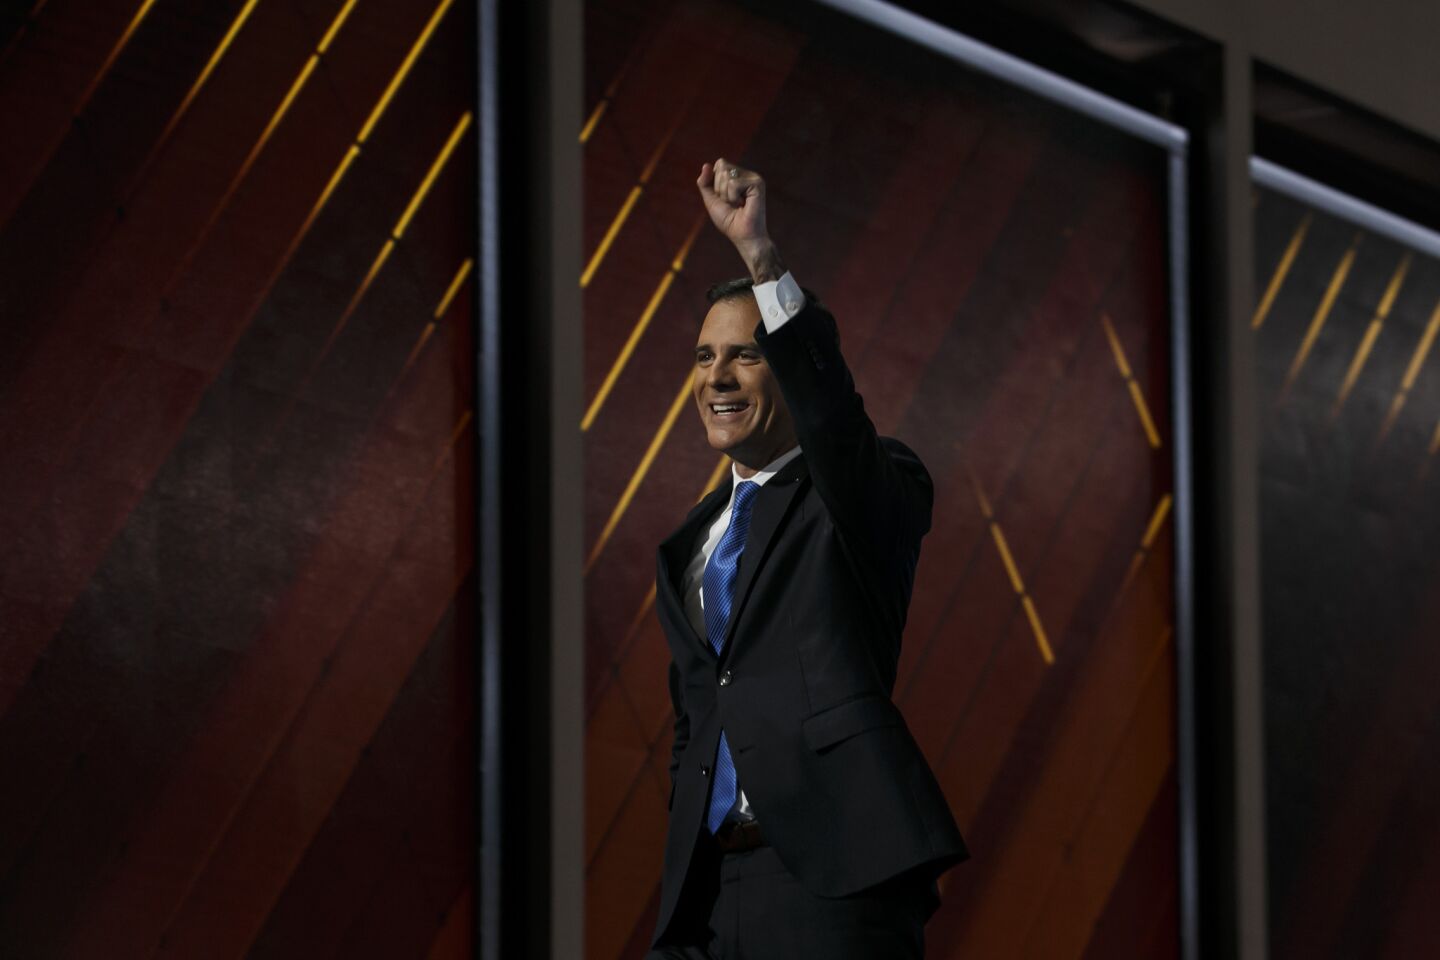 Mayor Eric Garcetti, shown at the Democratic National Convention in Philadelphia, is in Rio de Janeiro trying to gain support for Los Angeles' bid to host the Olympics in 2024.